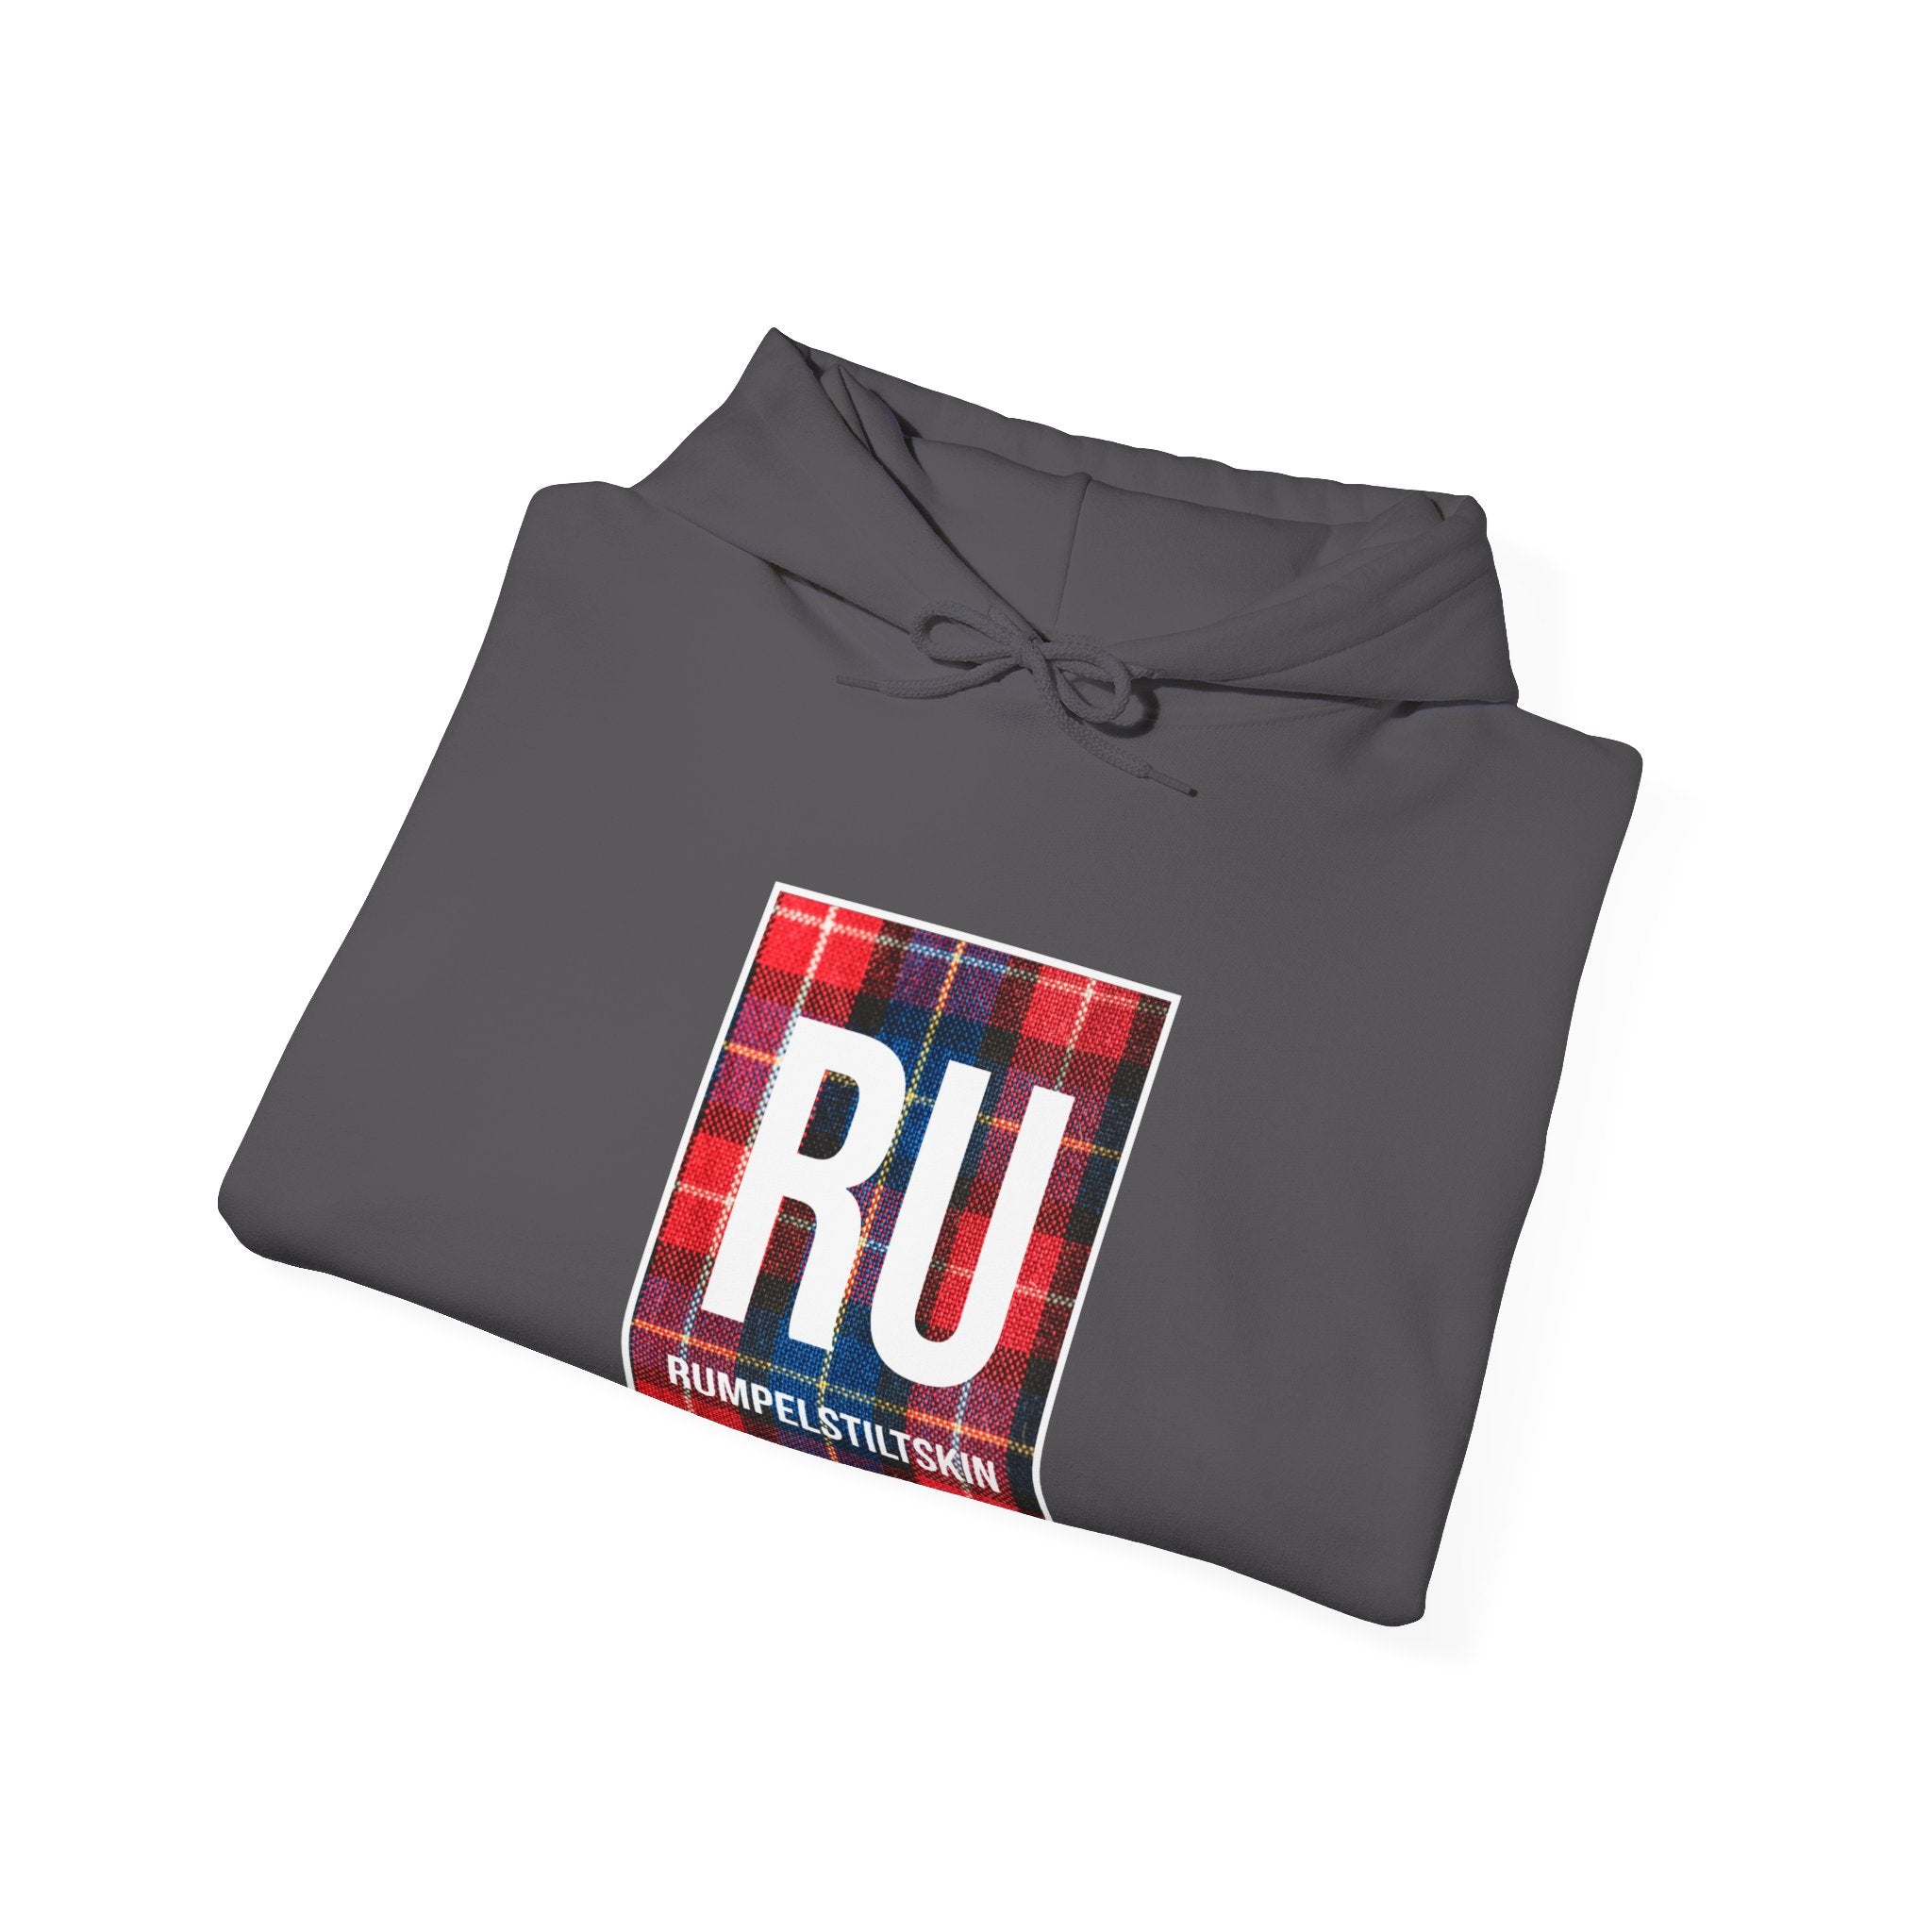 Folded dark gray RU - Hooded Sweatshirt featuring a large "RU" with a red and blue plaid pattern and the word "Rumpelstiltskin" below, blending comfort and style perfectly.